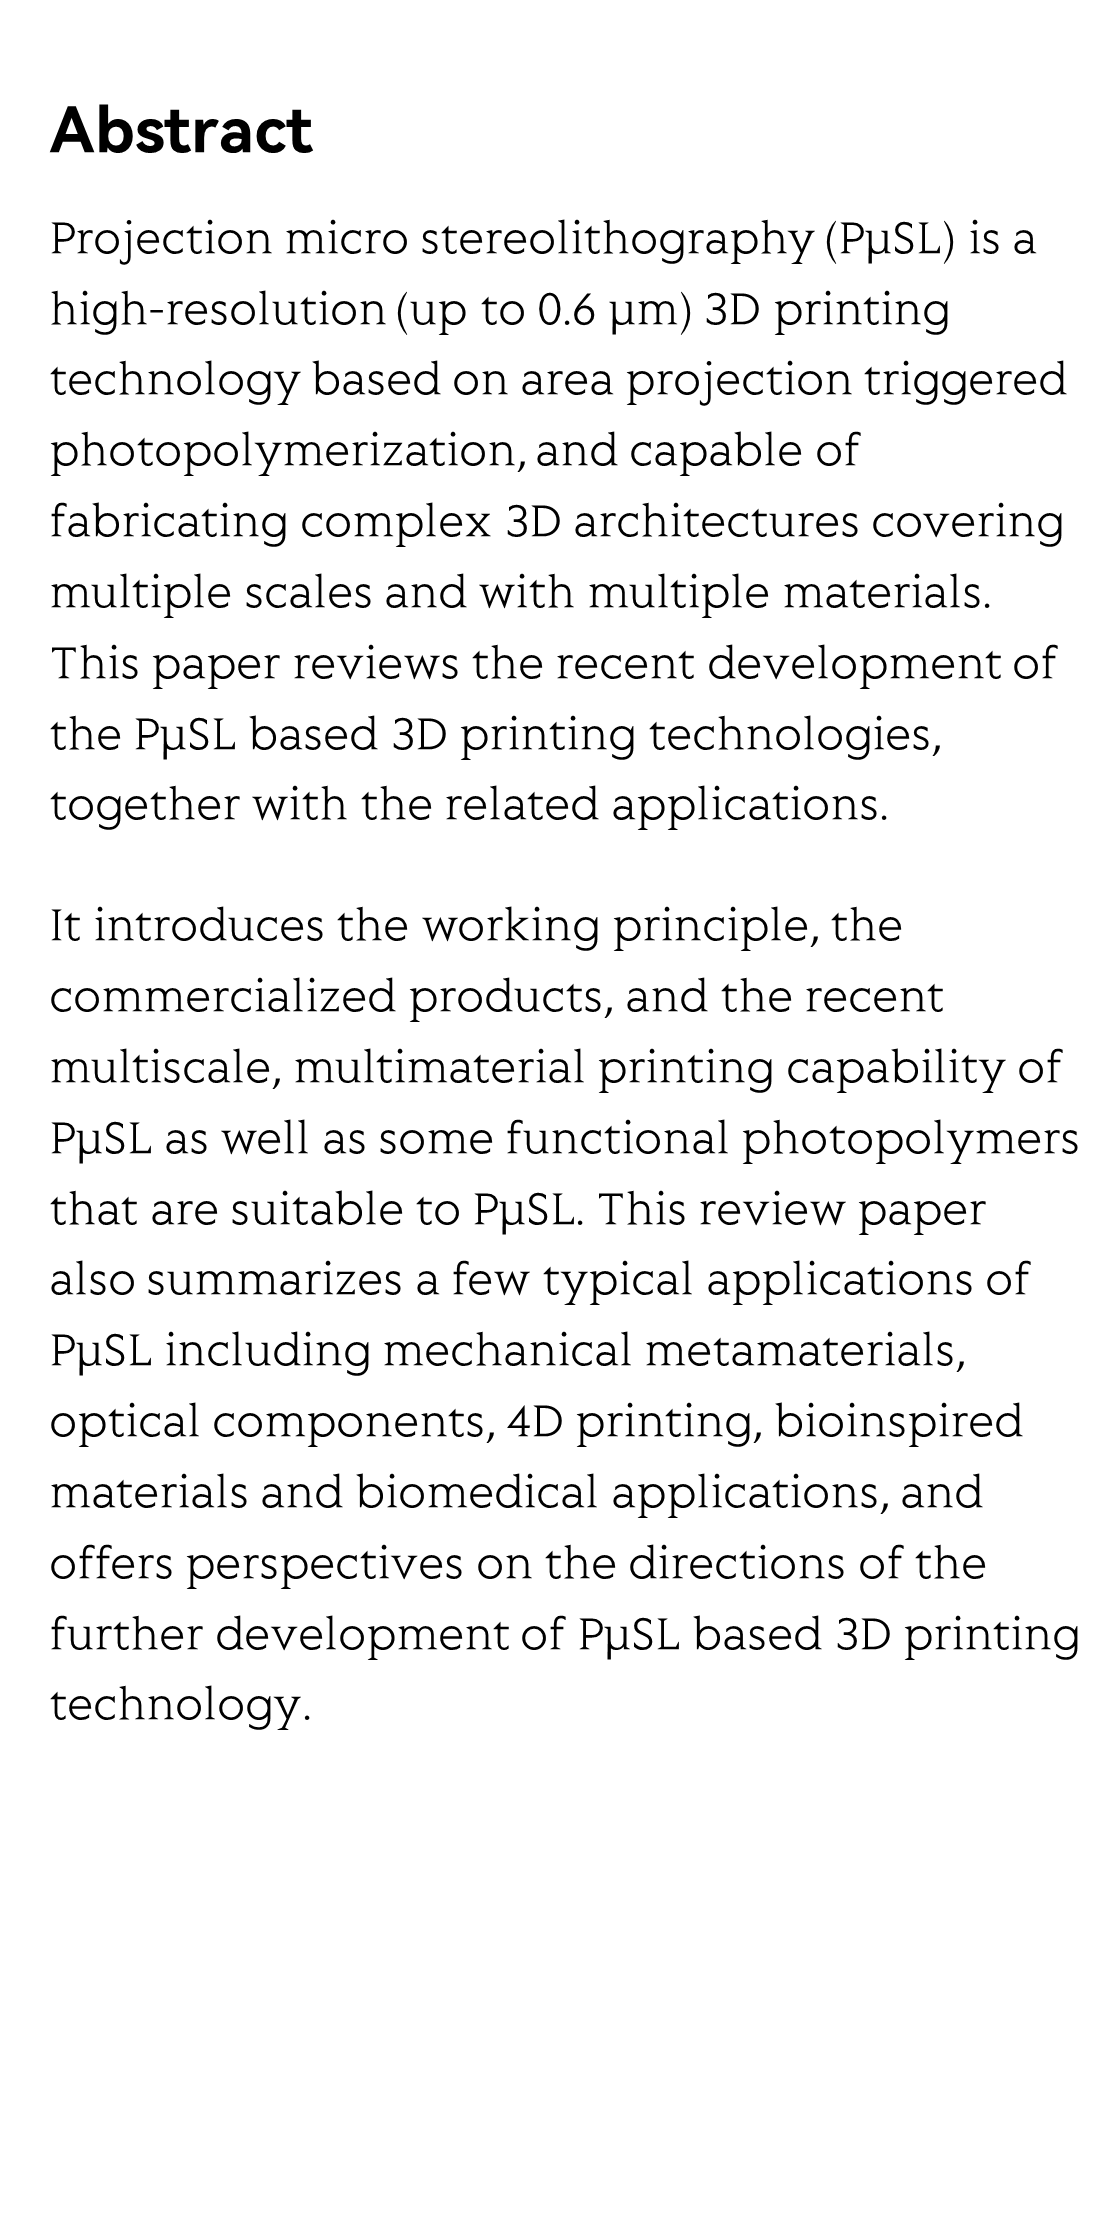 Projection micro stereolithography based 3D printing and its applications_2